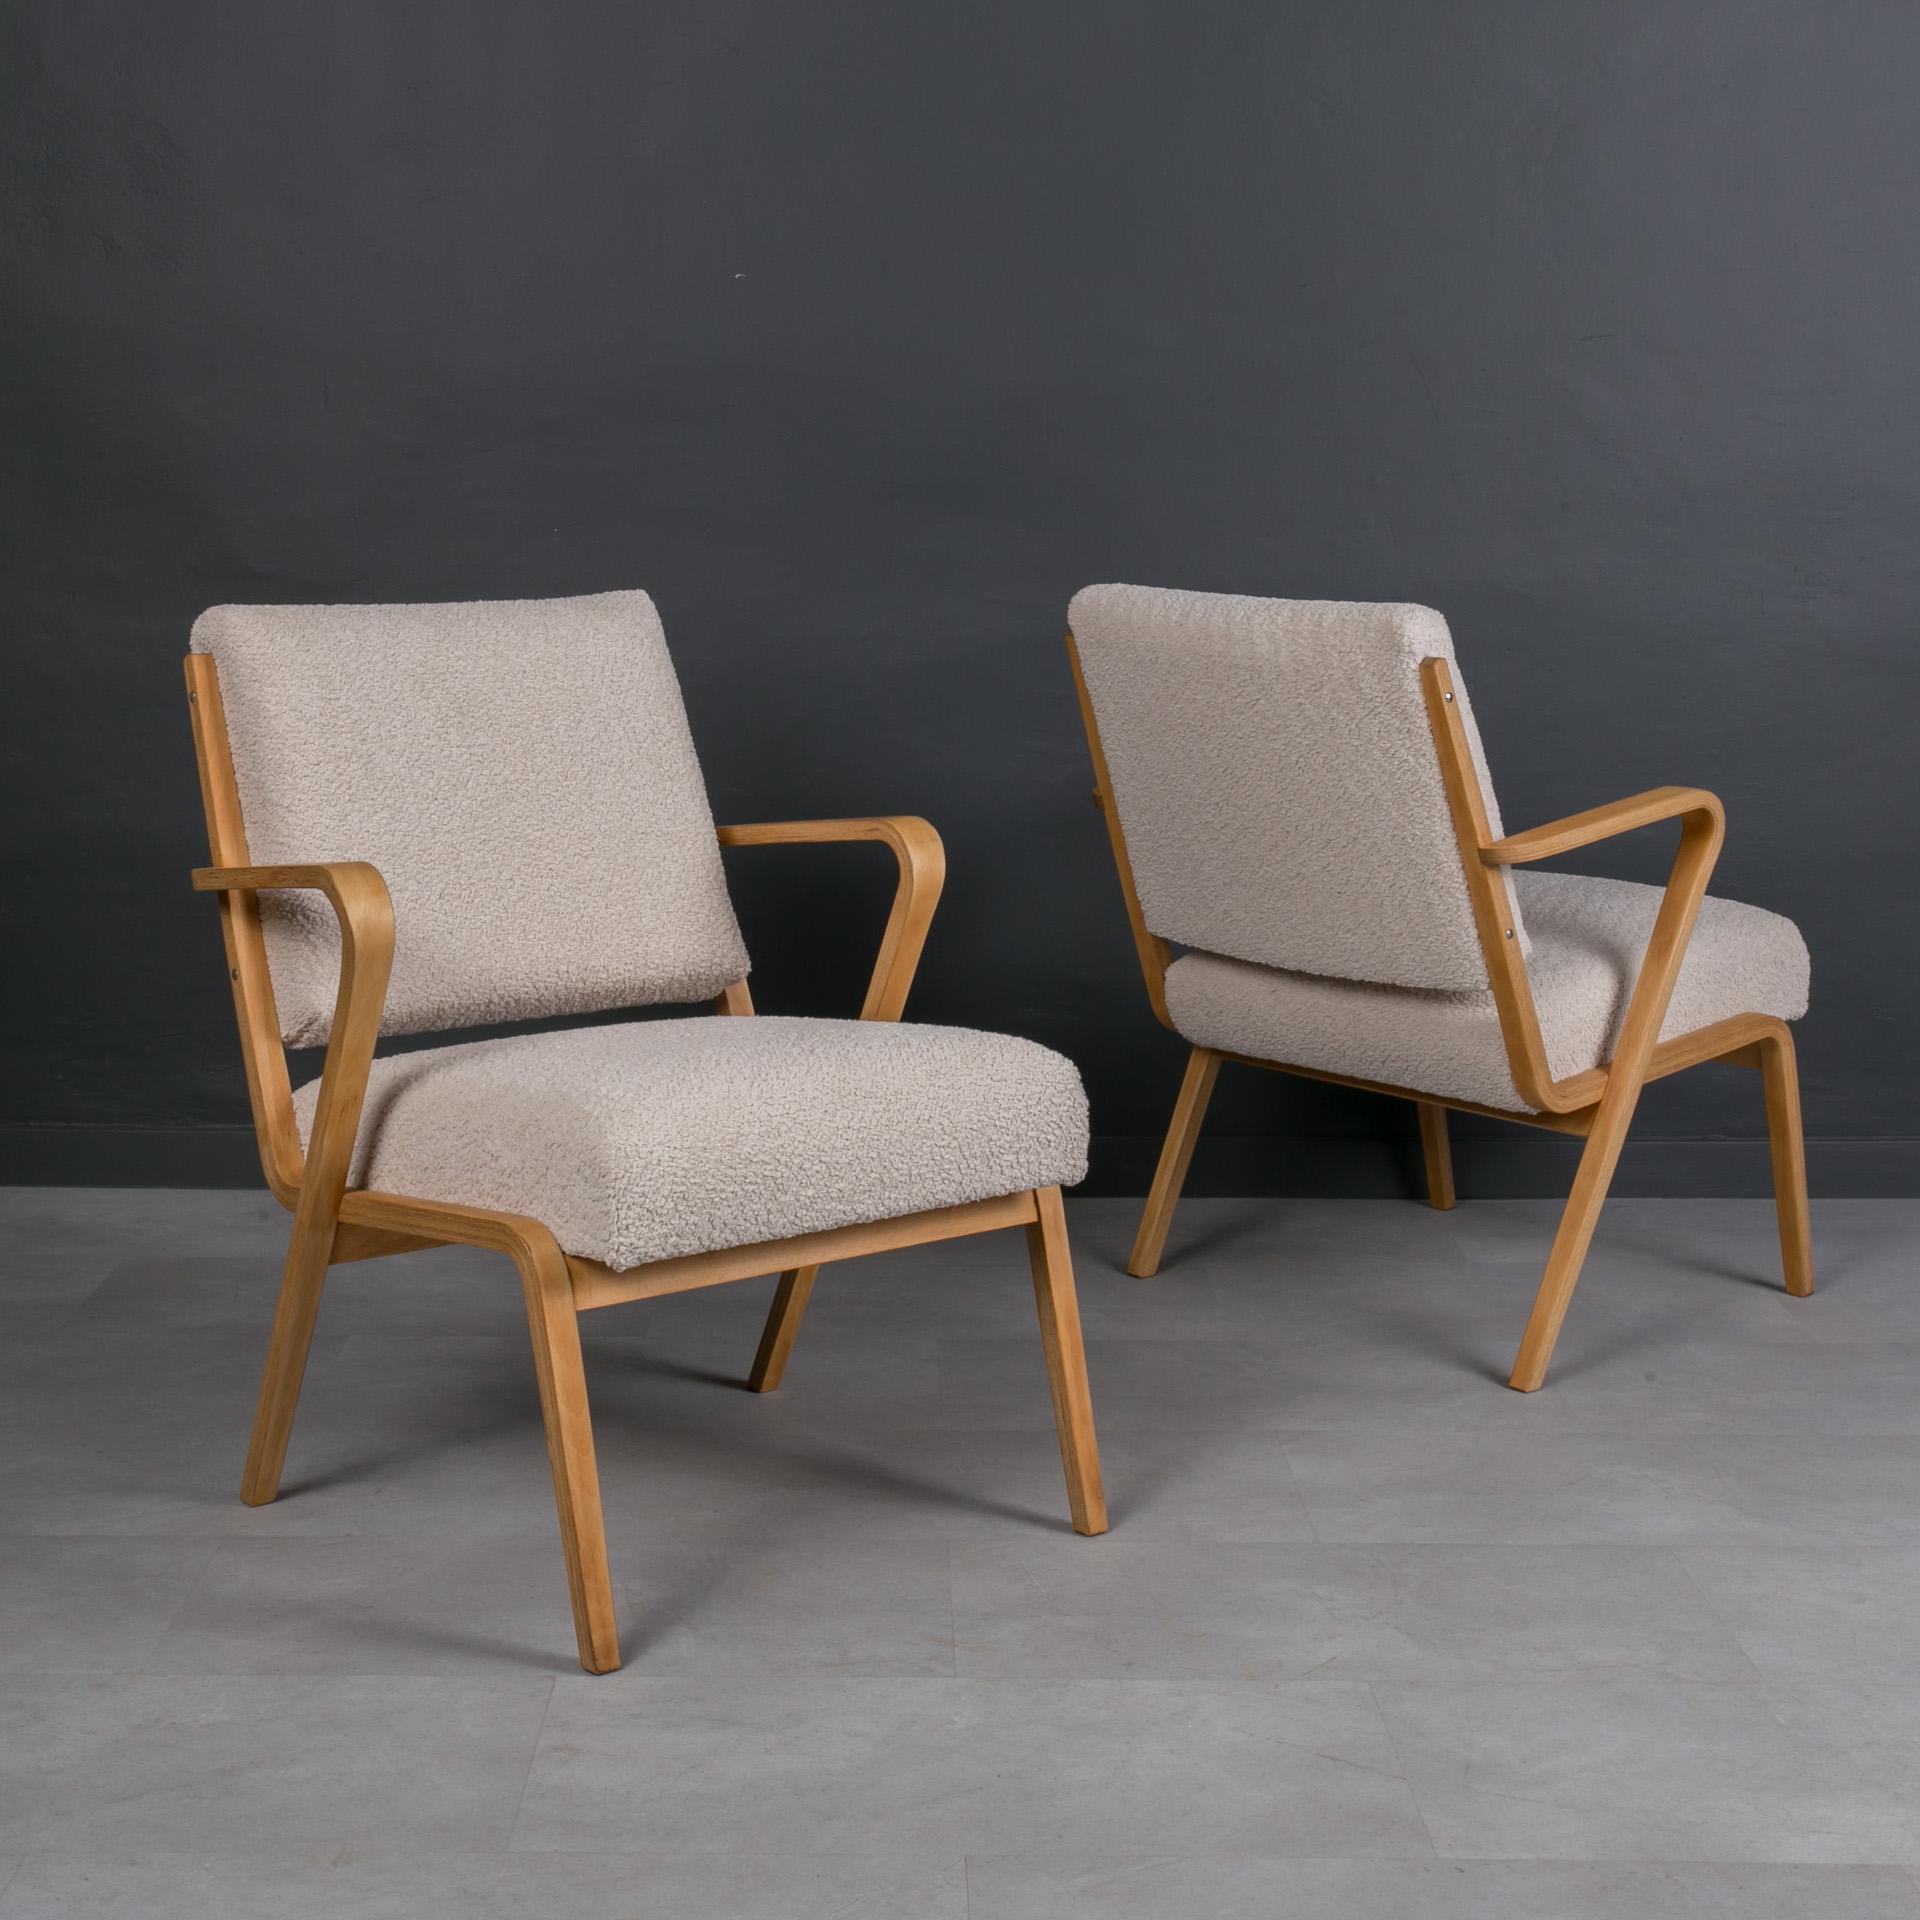 This set of lounge chairs comes from Germany and was made around 1960s. Designed for Deutsche Werkstätten Hellerau in 1957 by Selman Selmanagić, a Bosnian-German architect The chairs are after complete renovation. Wooden elements were cleaned and